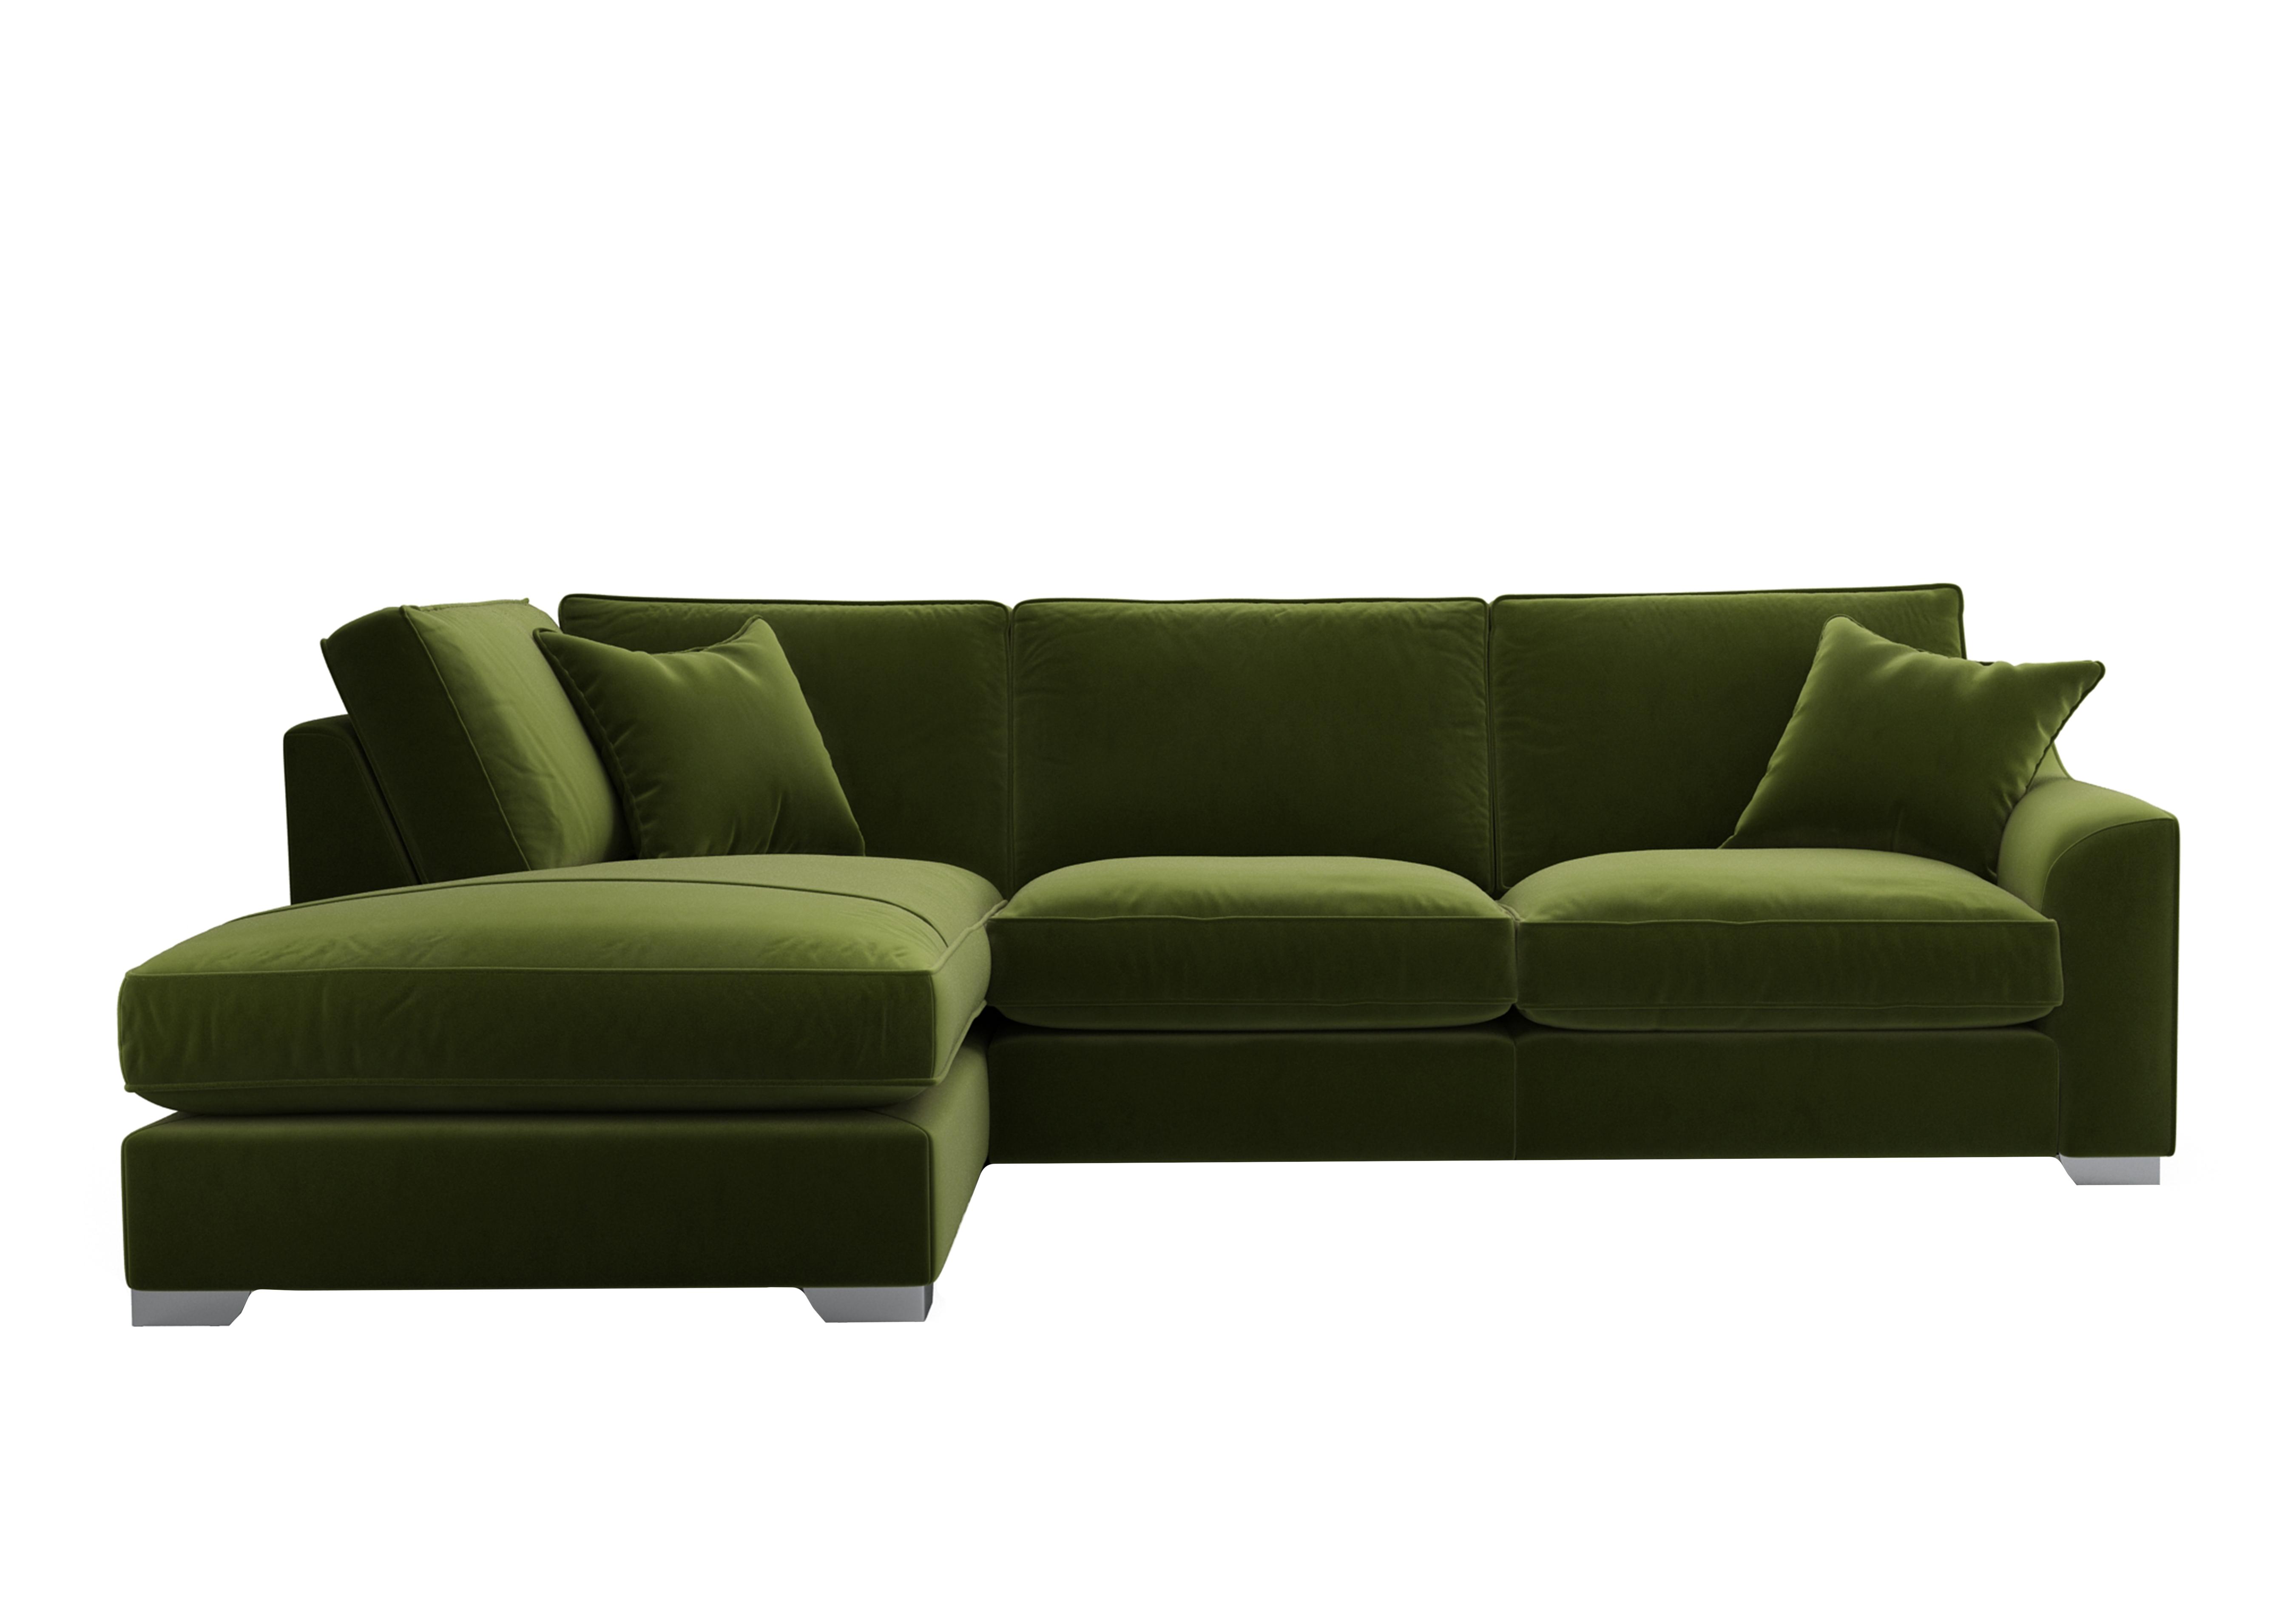 Isobel Fabric Corner Sofa with Chaise End in Woo160 Woodland Moss Ch Ft on Furniture Village